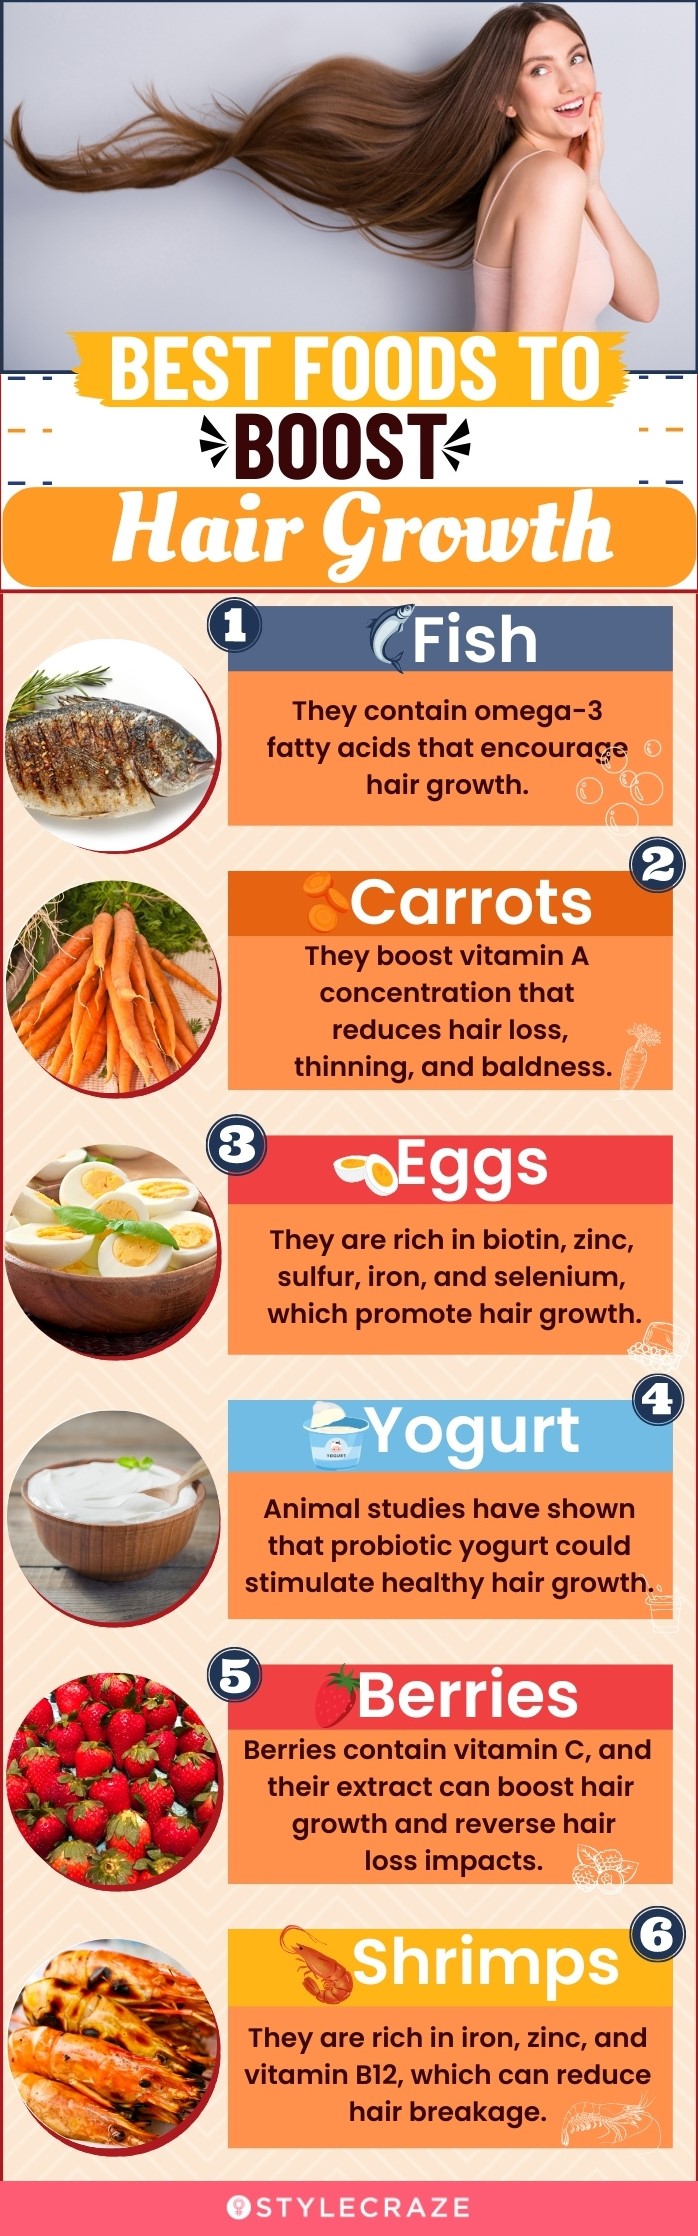 Can Nutritional Deficiency Cause Hair Loss? | Hair Sure